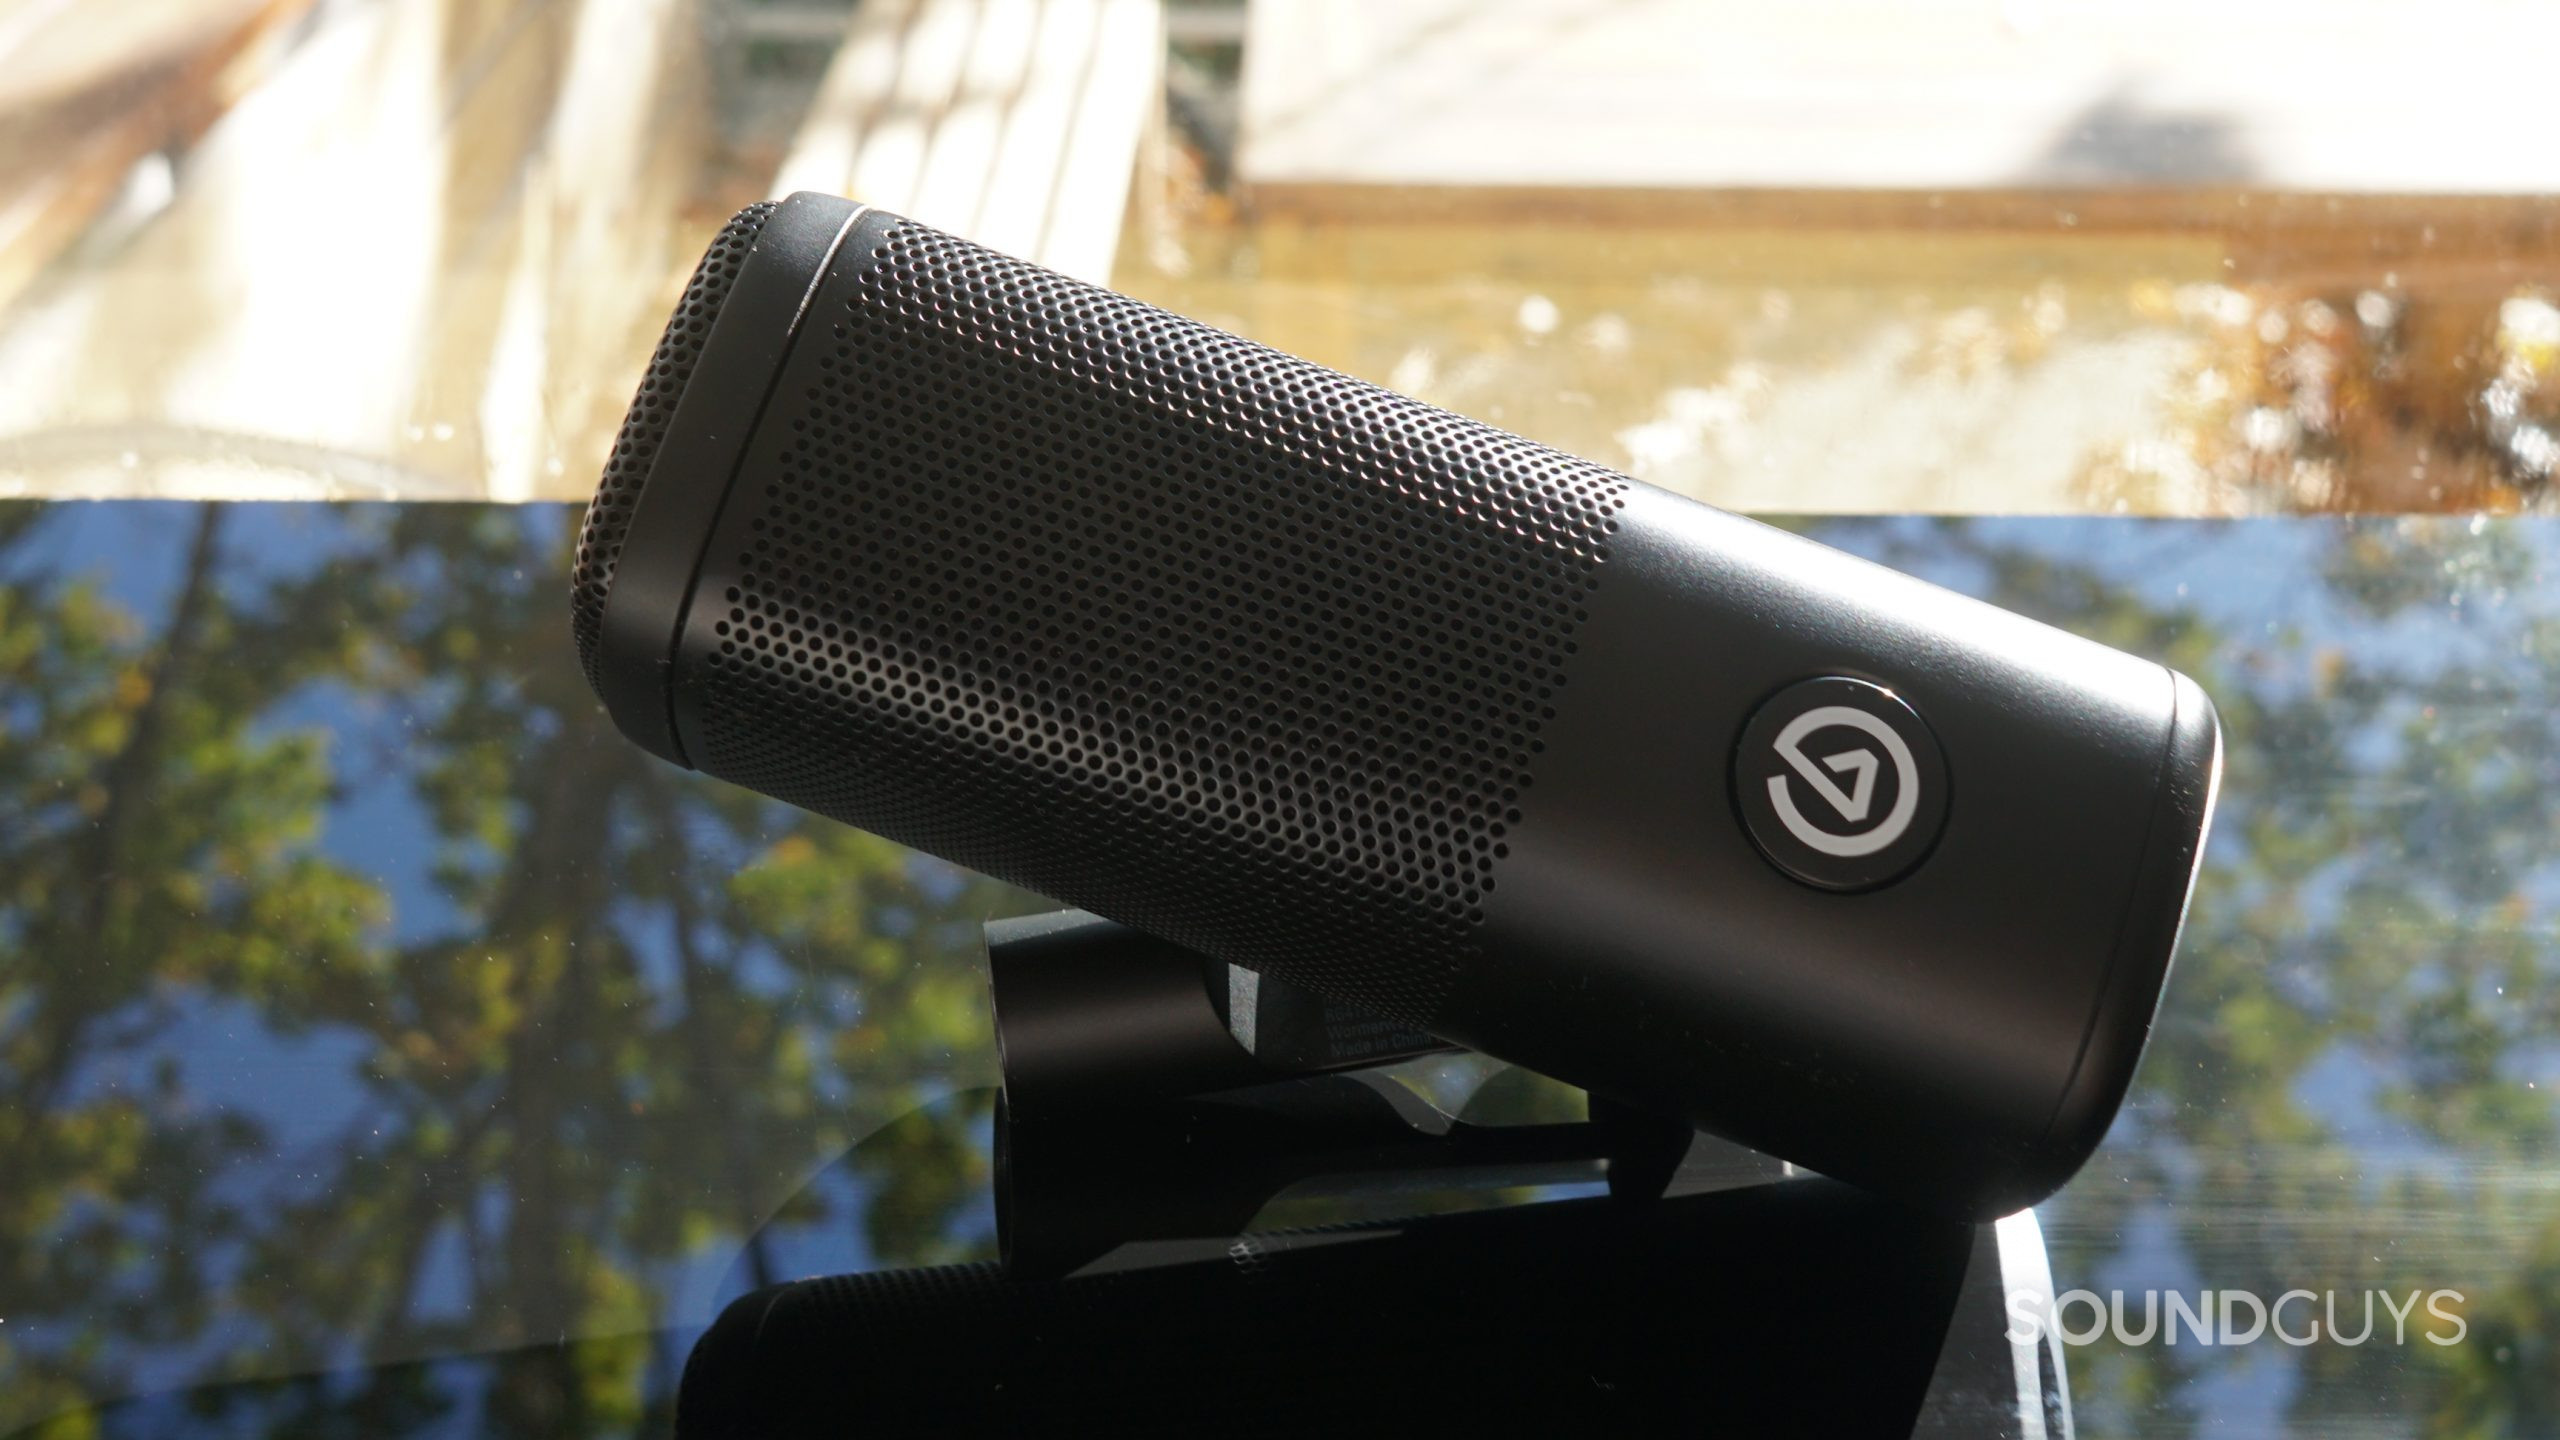 The Elgato Wave Dx mic lays on a black reflective surface next to a window